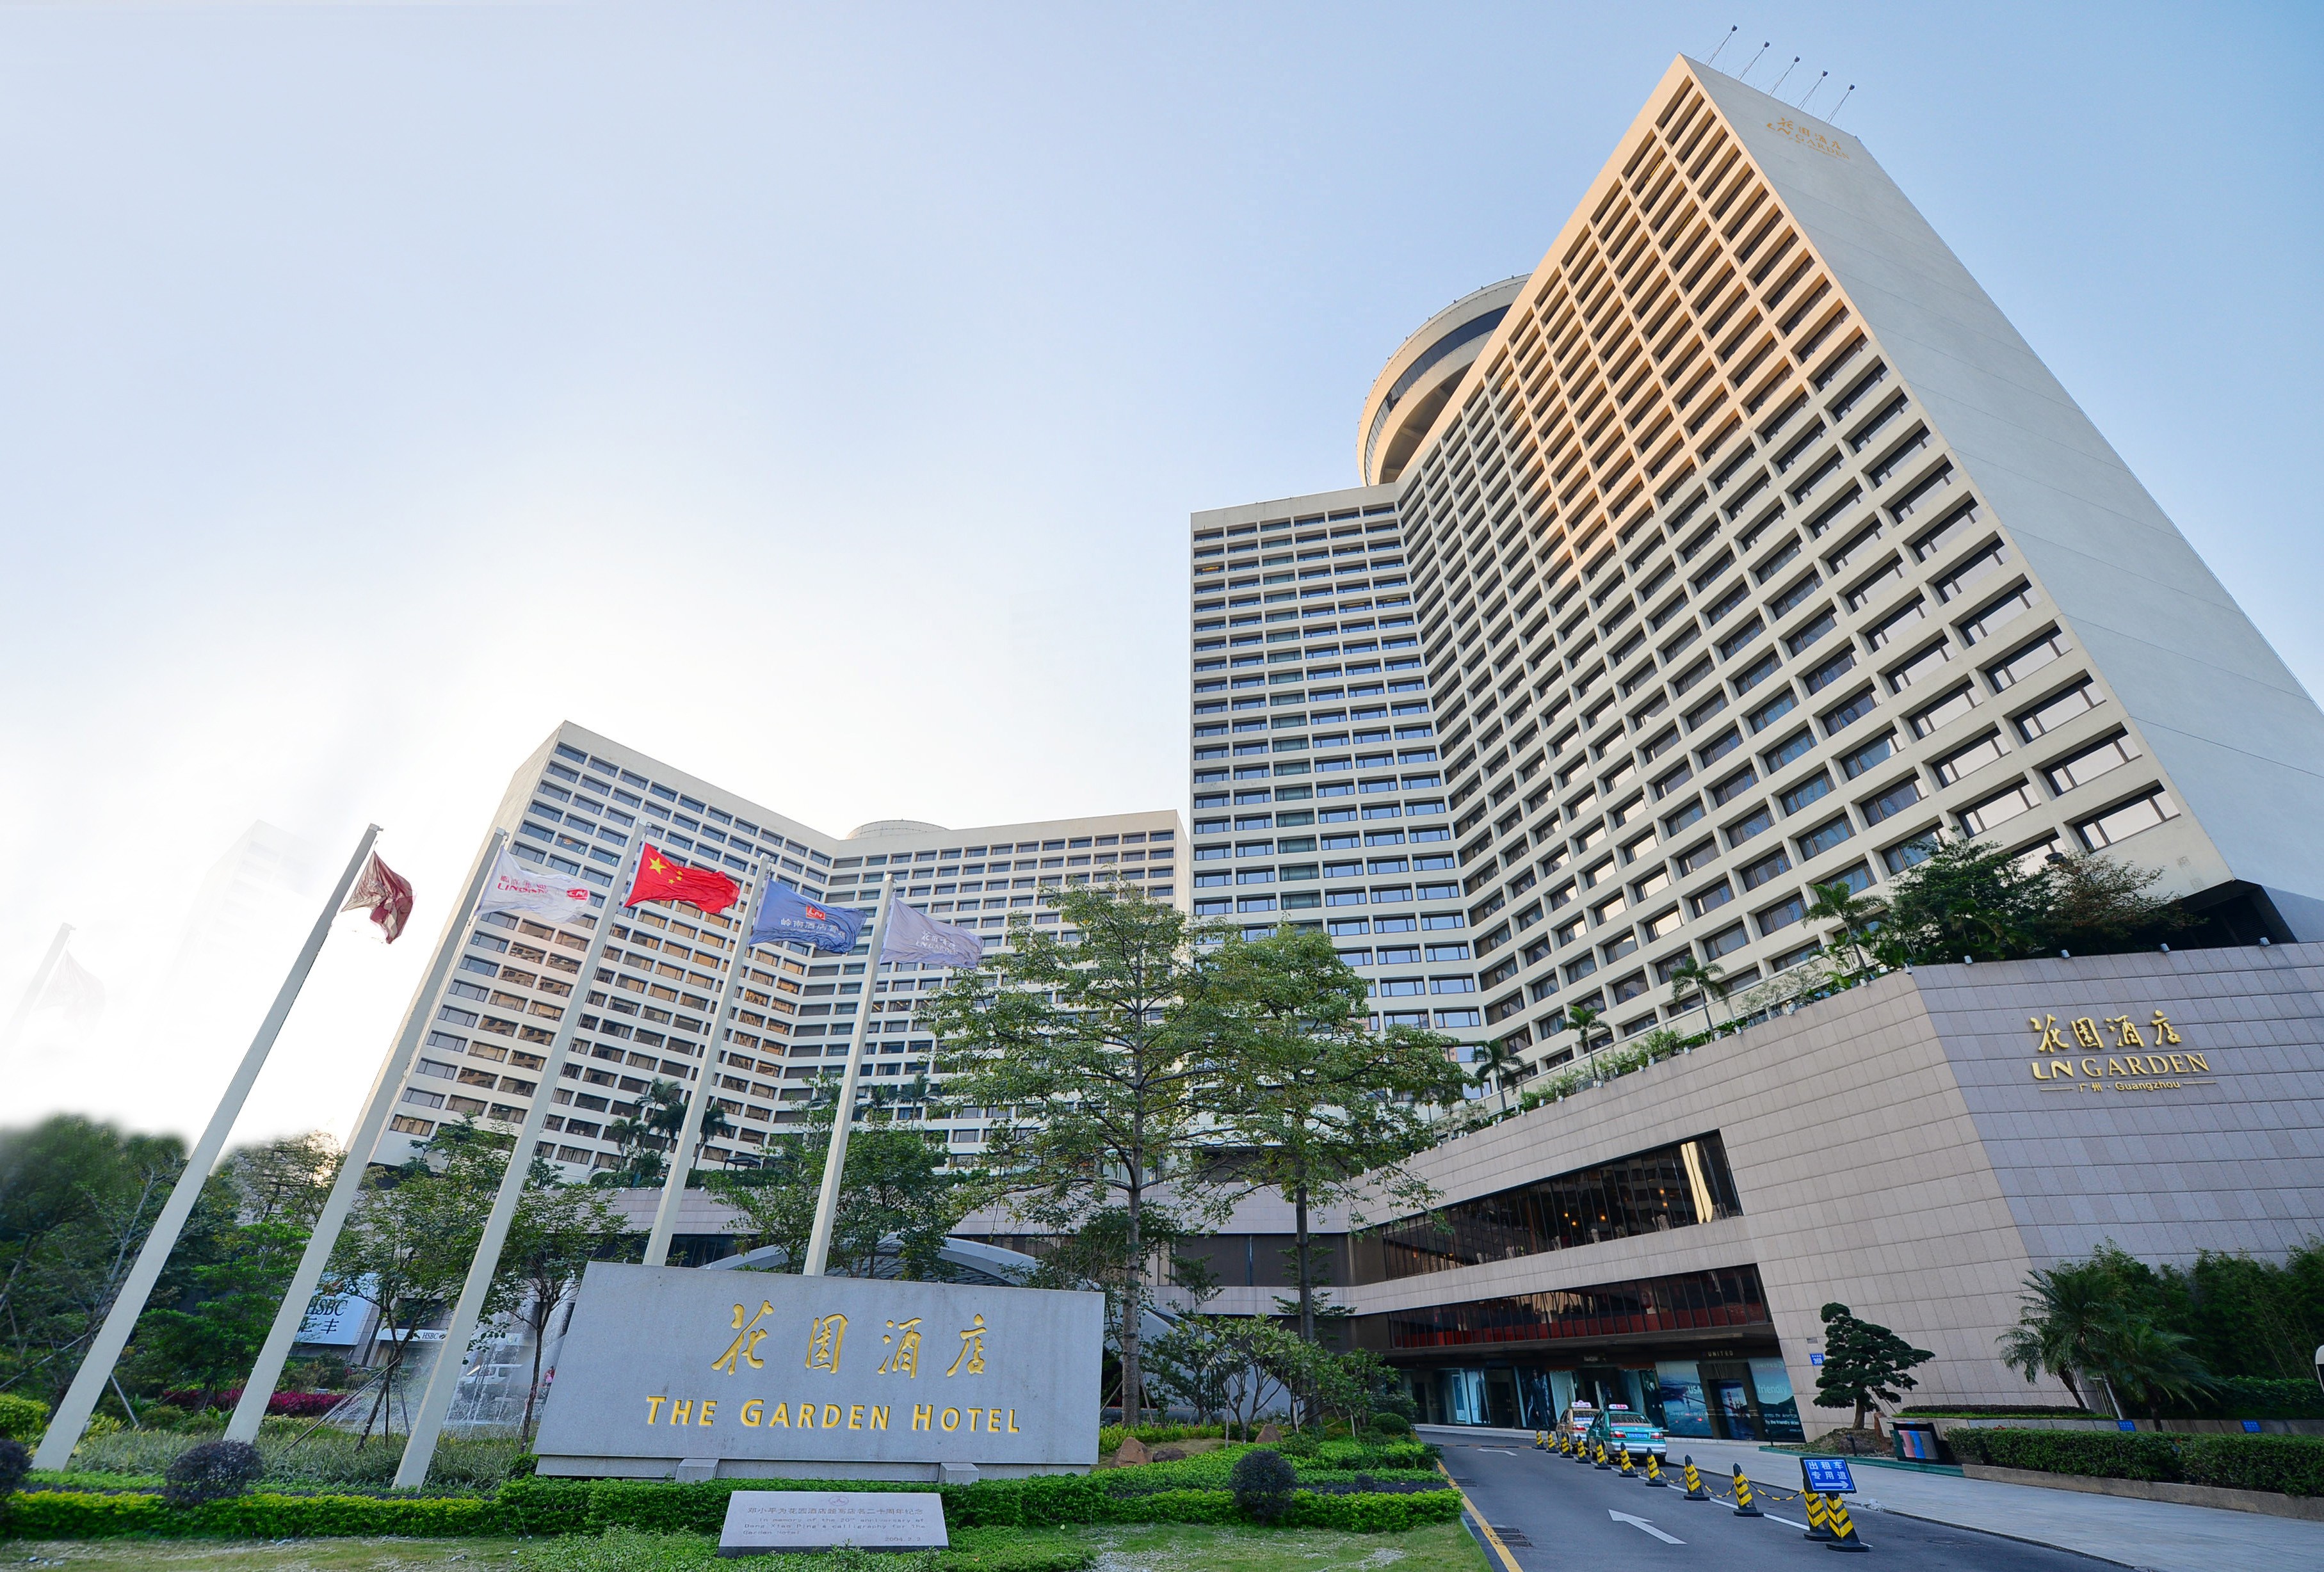 The LN Garden Hotel, Guangzhou, has recently completed a major upgrade.